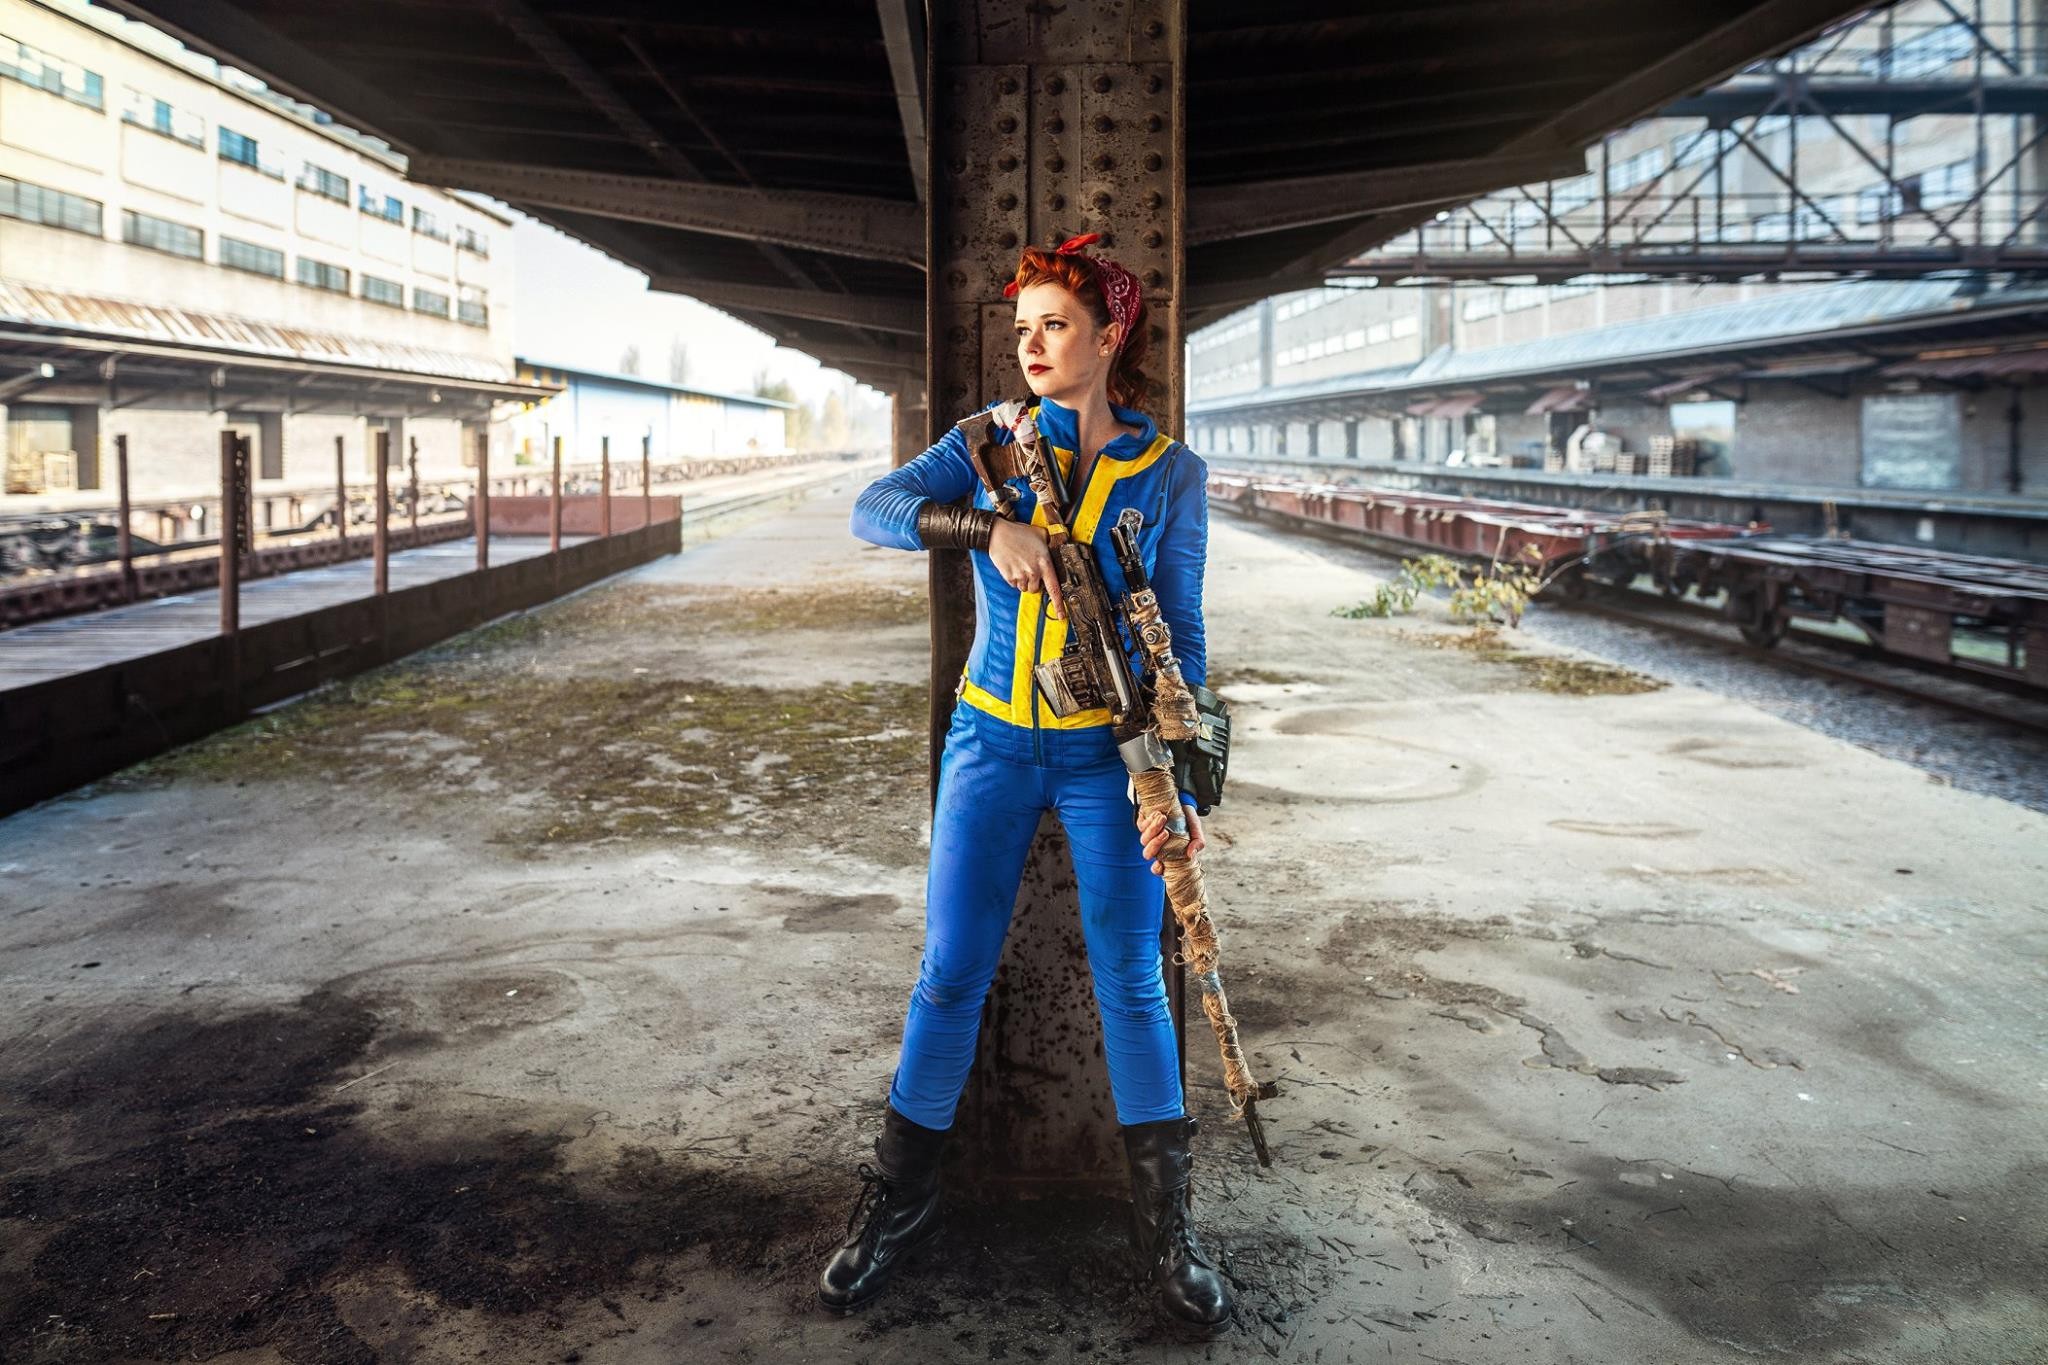 Women Redhead Cosplay Fallout Fallout 4 Video Games Rifles Sniper Rifle Railway Railway Station Red  2048x1365